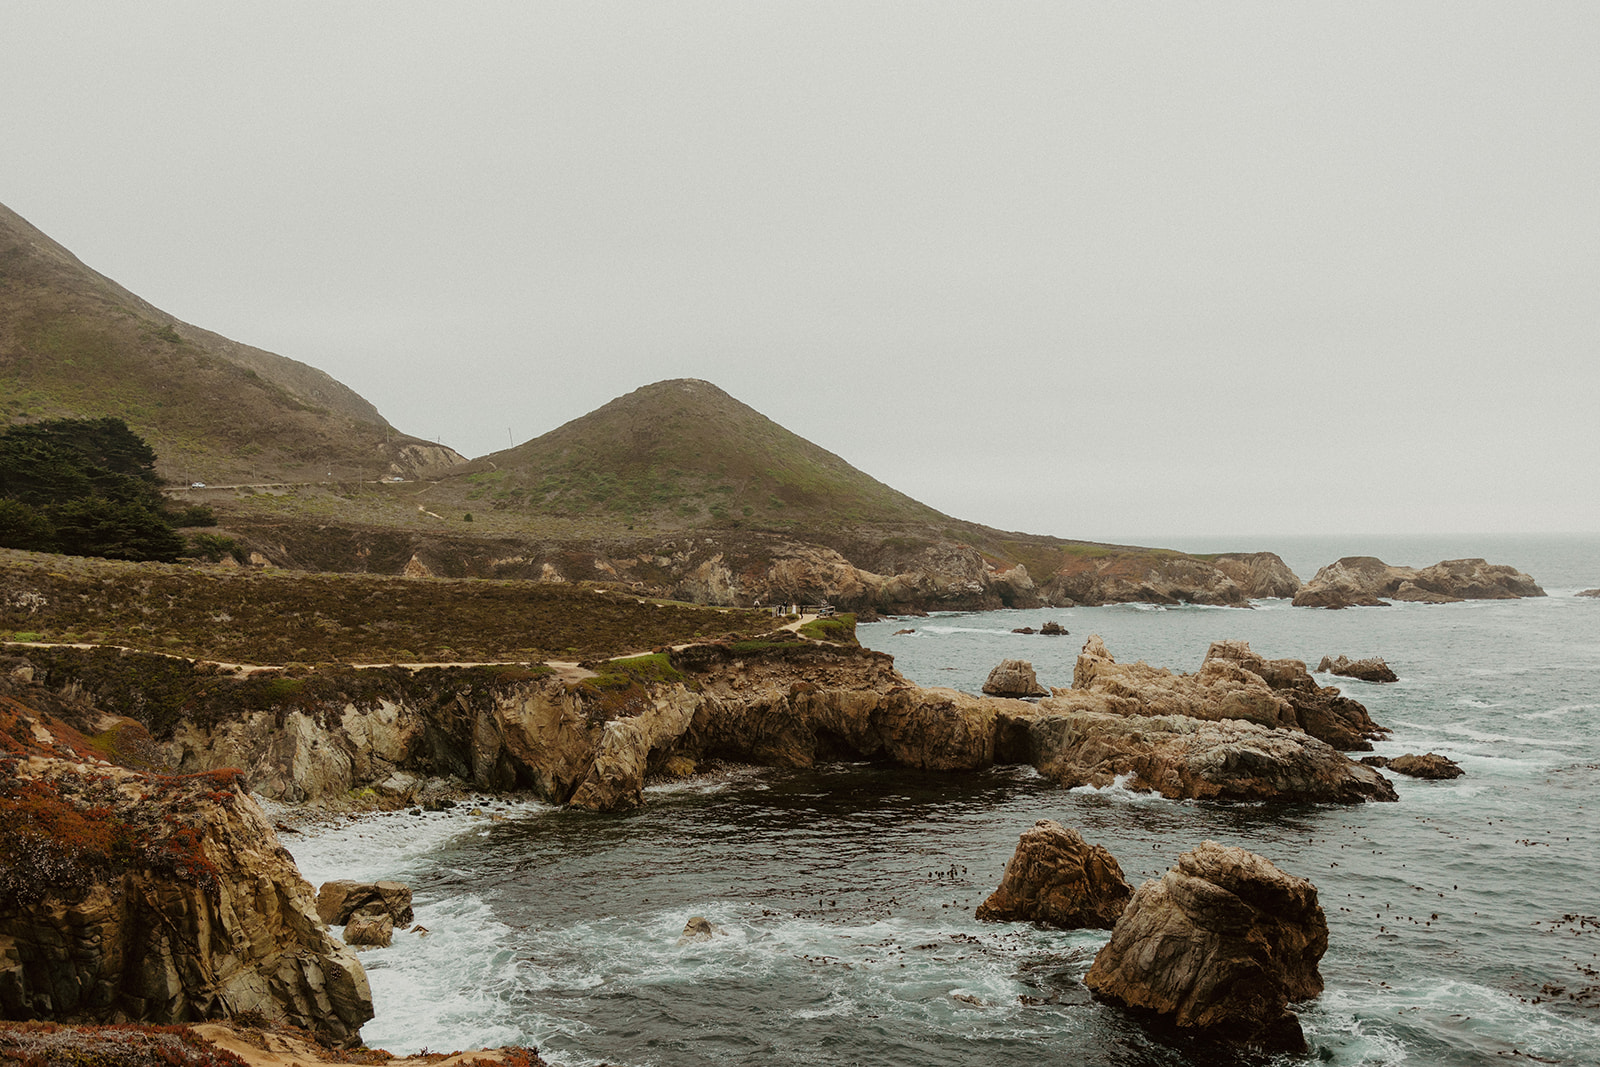 the coastline of Big Sur in California with the hills & rocks